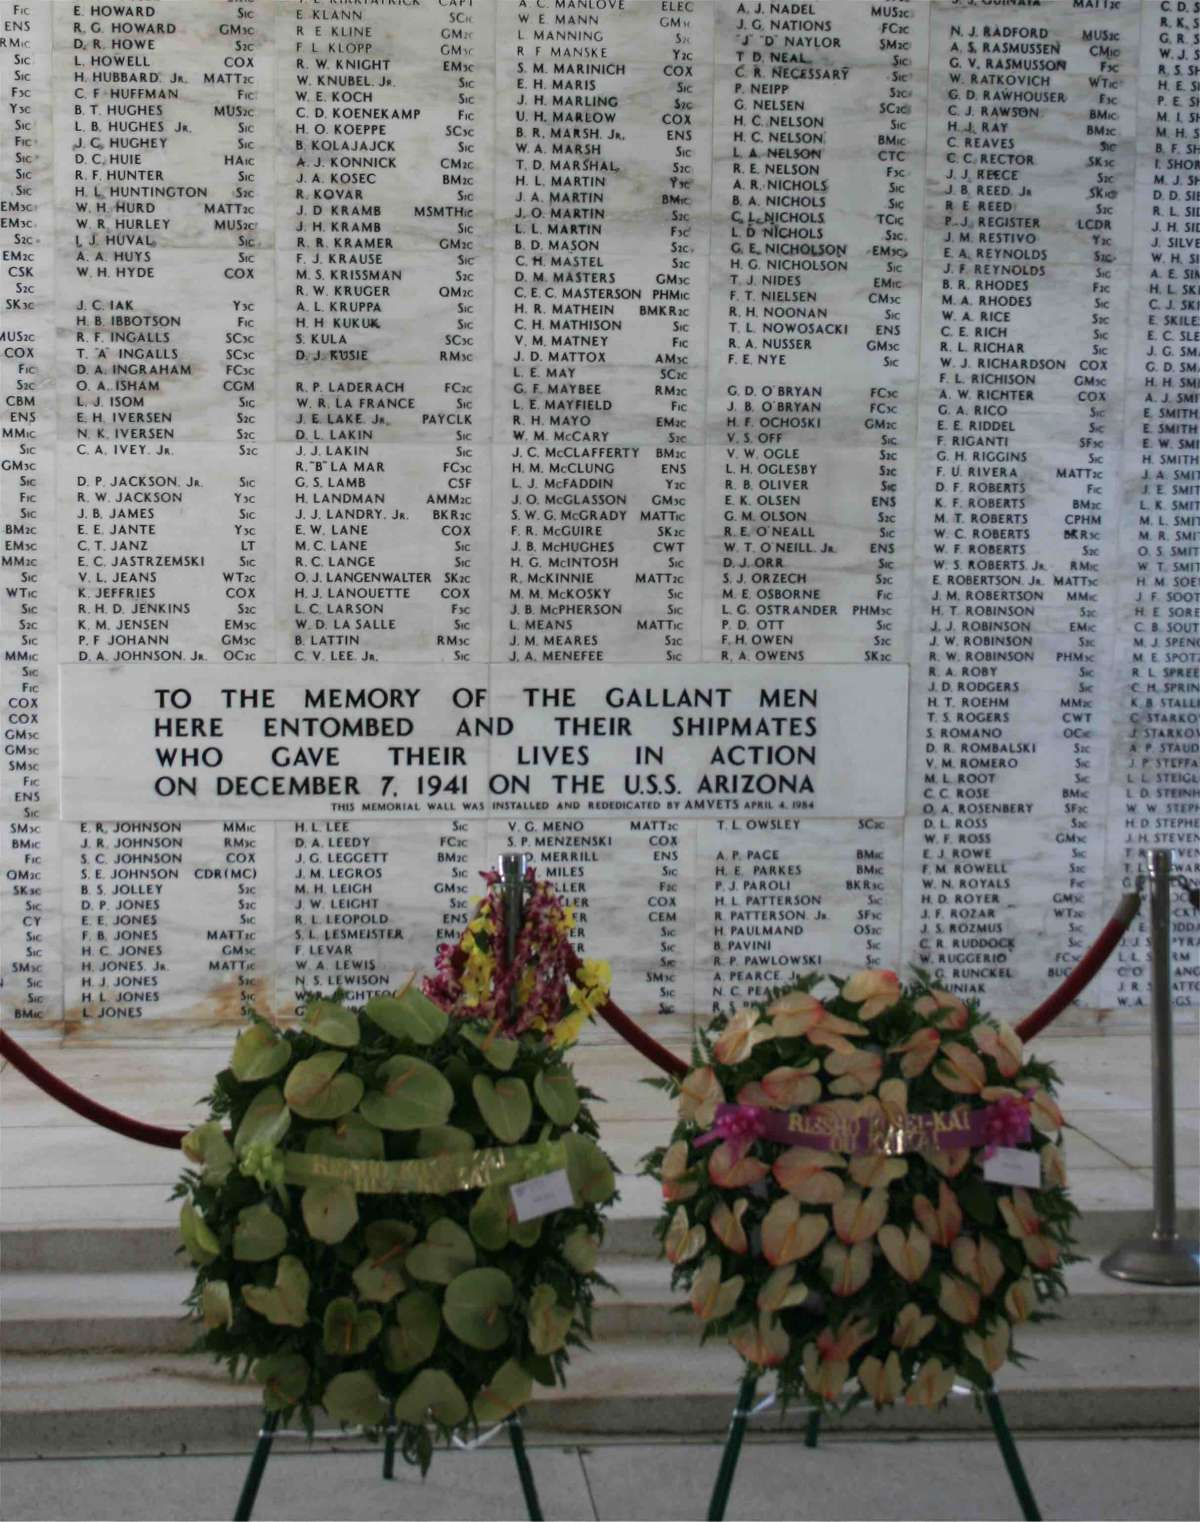 Names of over 1,100 persons who lost their  lives on the Arizona. 